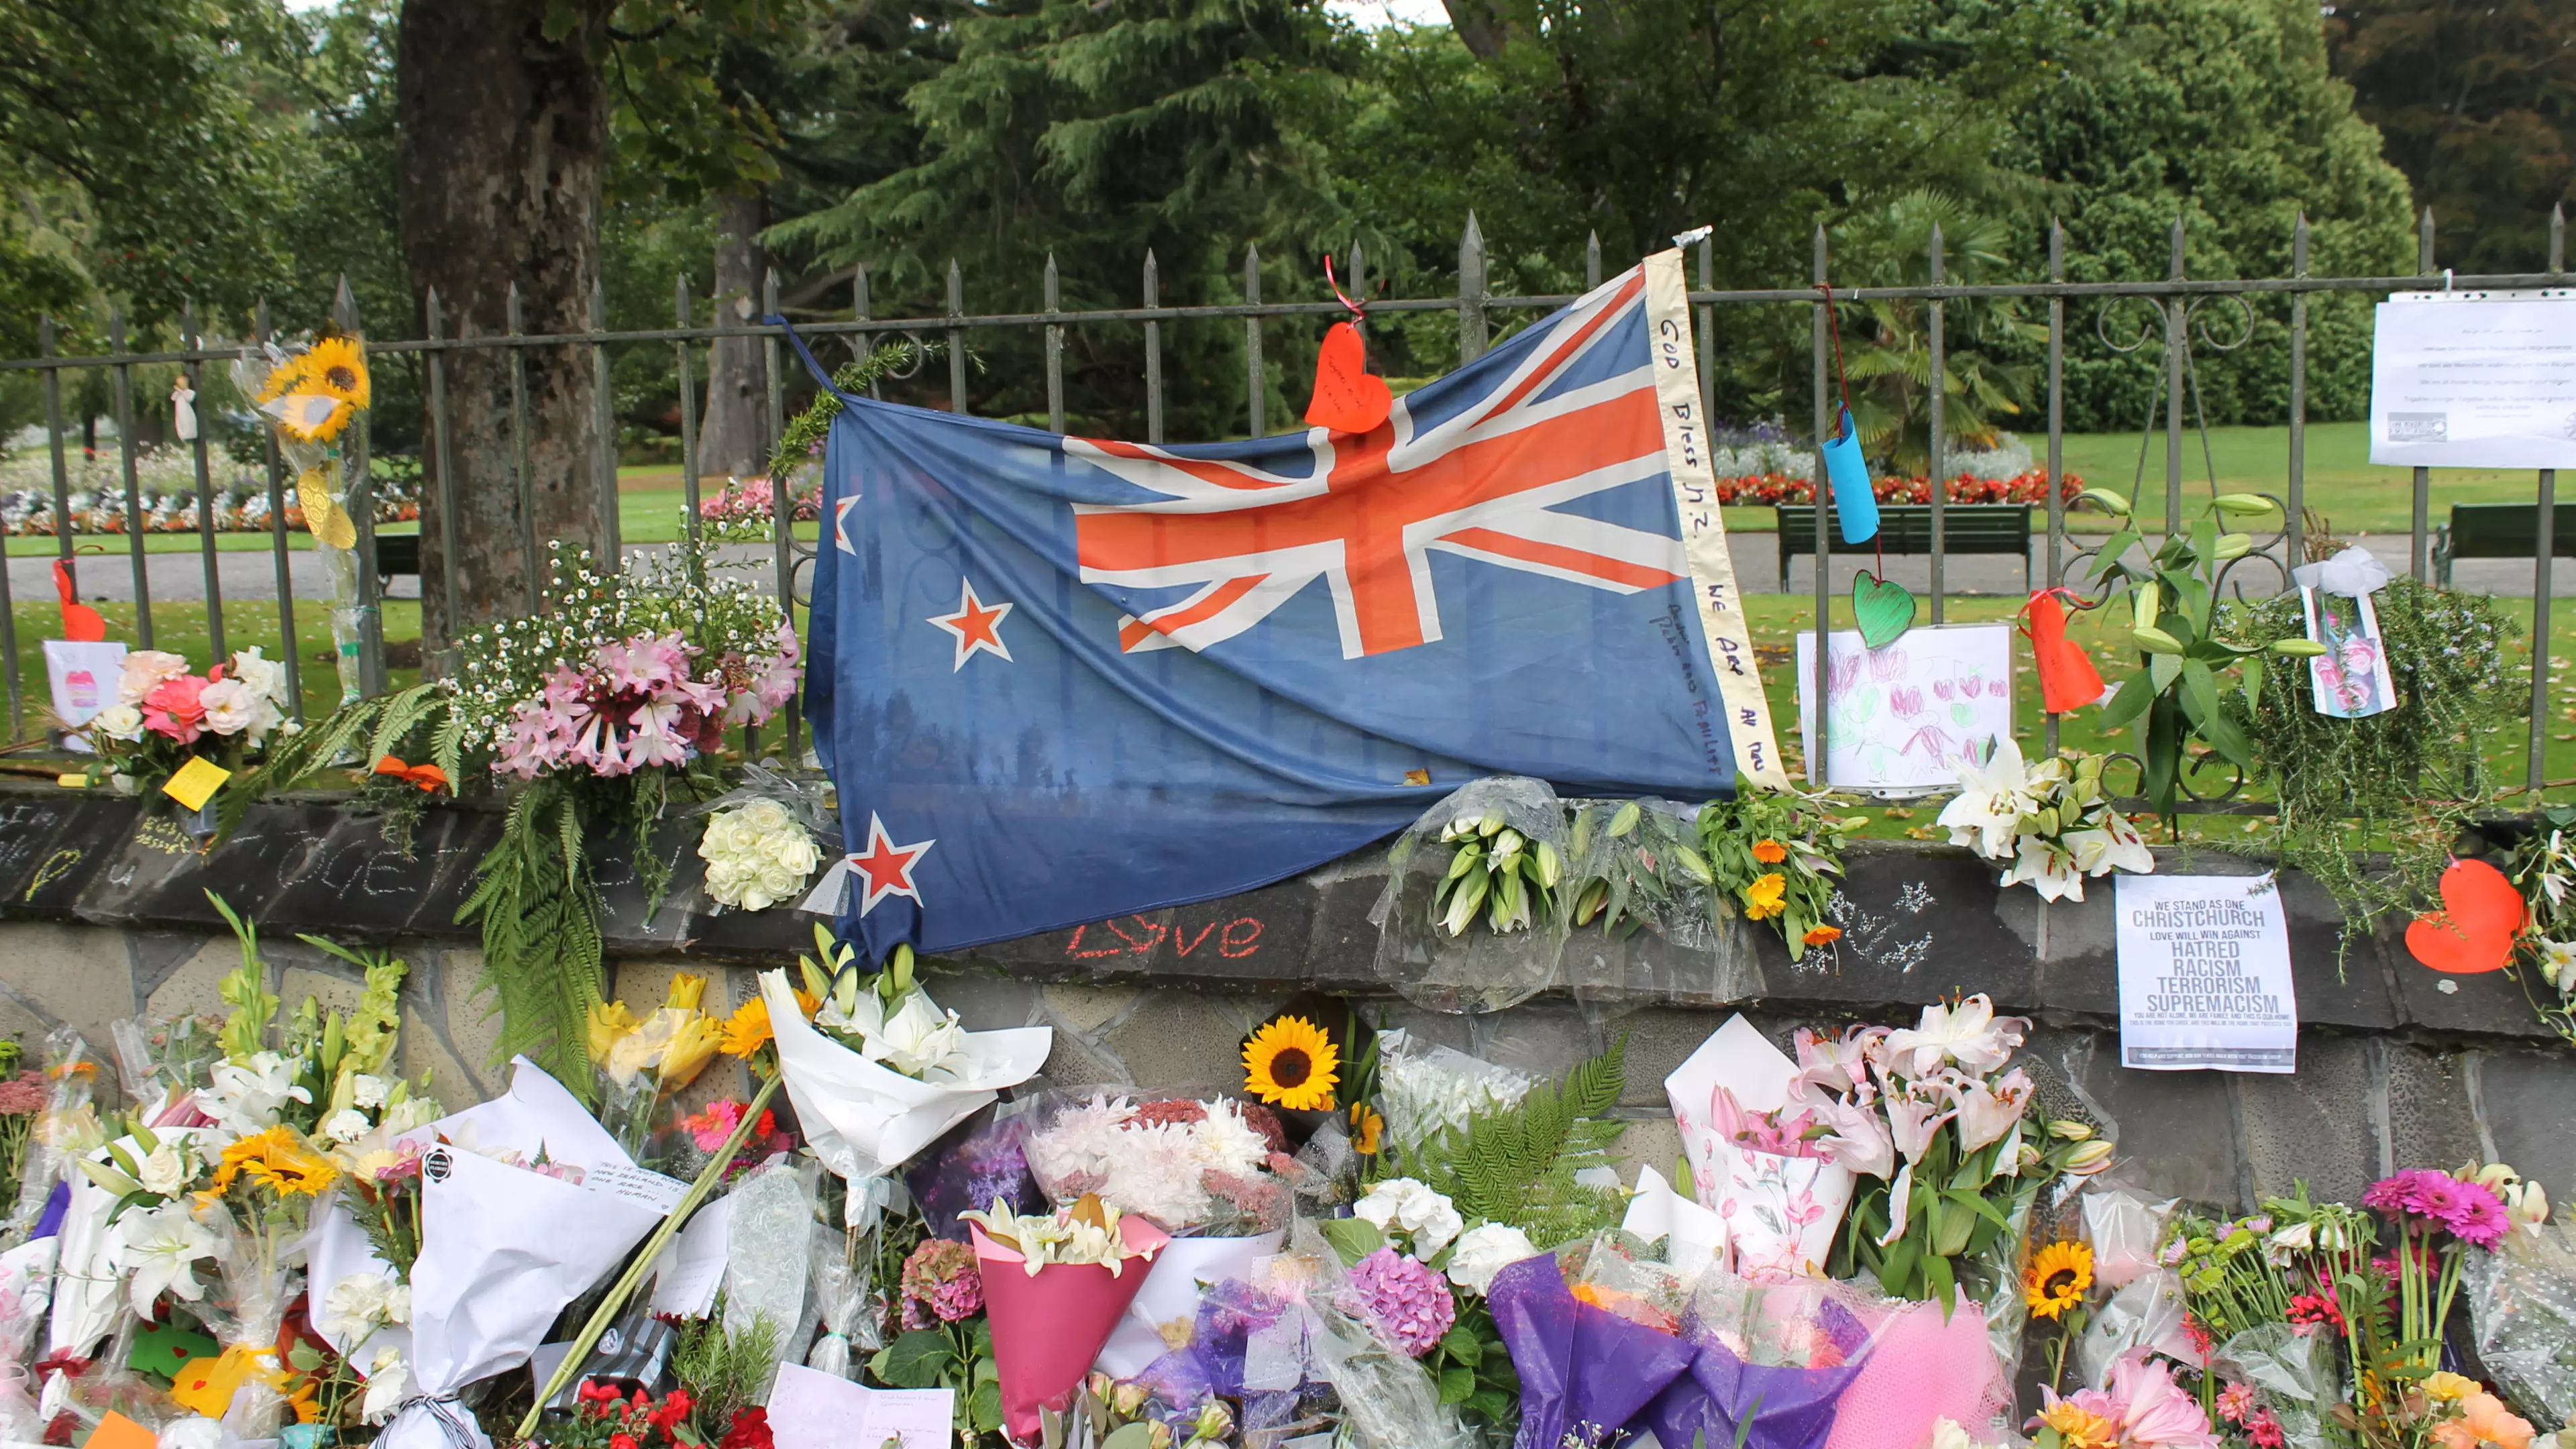 Alleged Christchurch Terror Attack Gunman Pleads Not Guilty To 51 Murder Charges